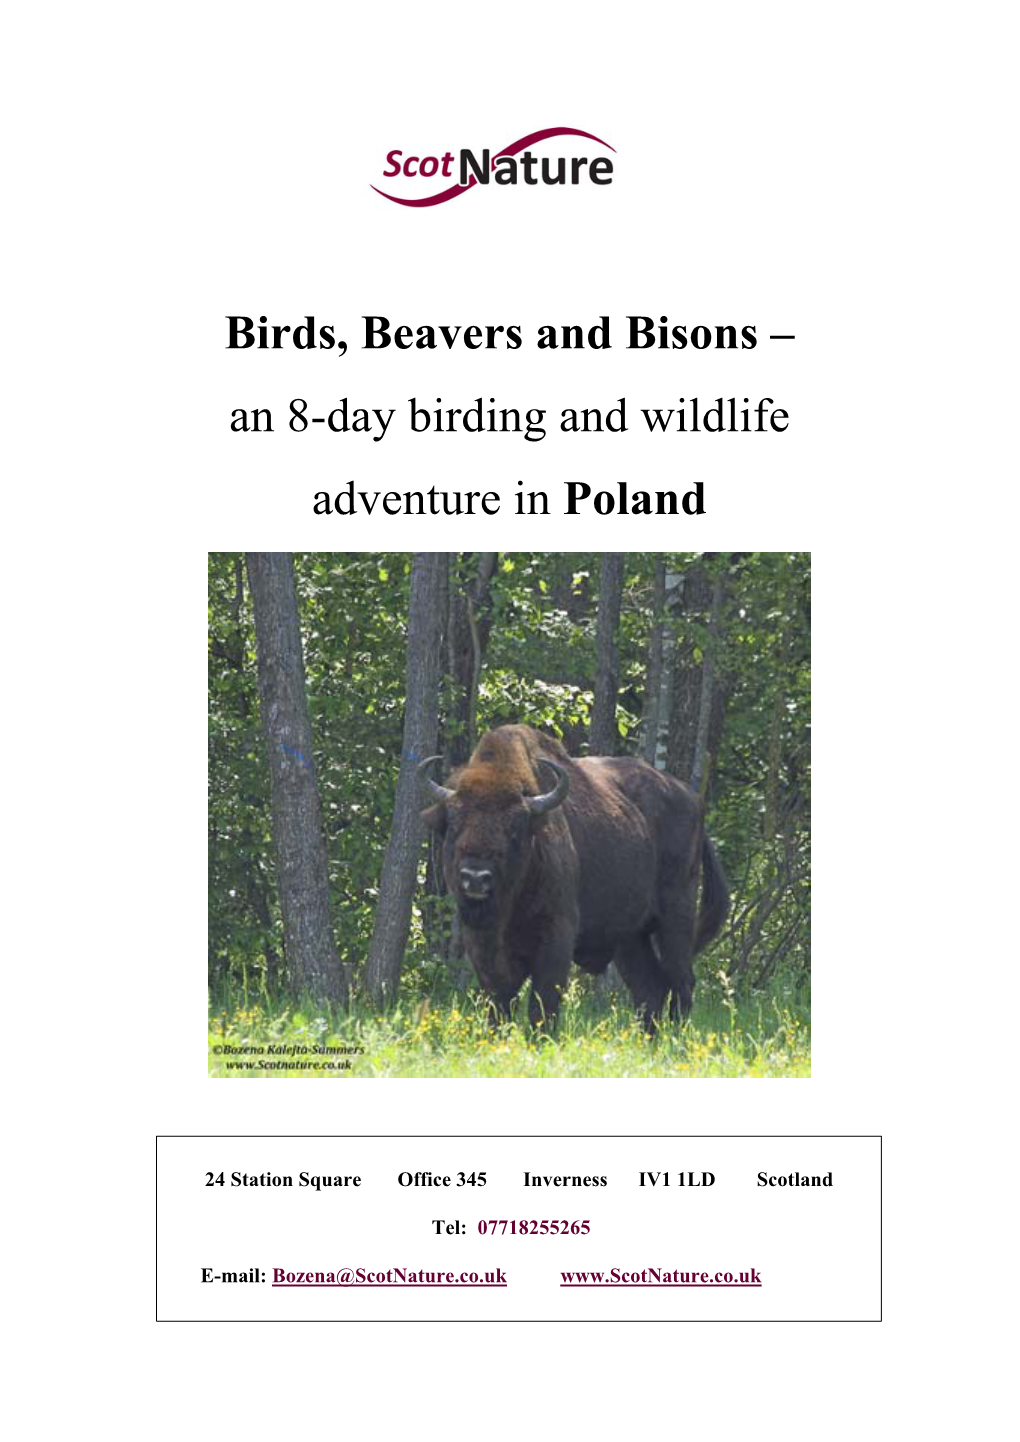 Birds, Beavers and Bisons – an 8-Day Birding and Wildlife Adventure In